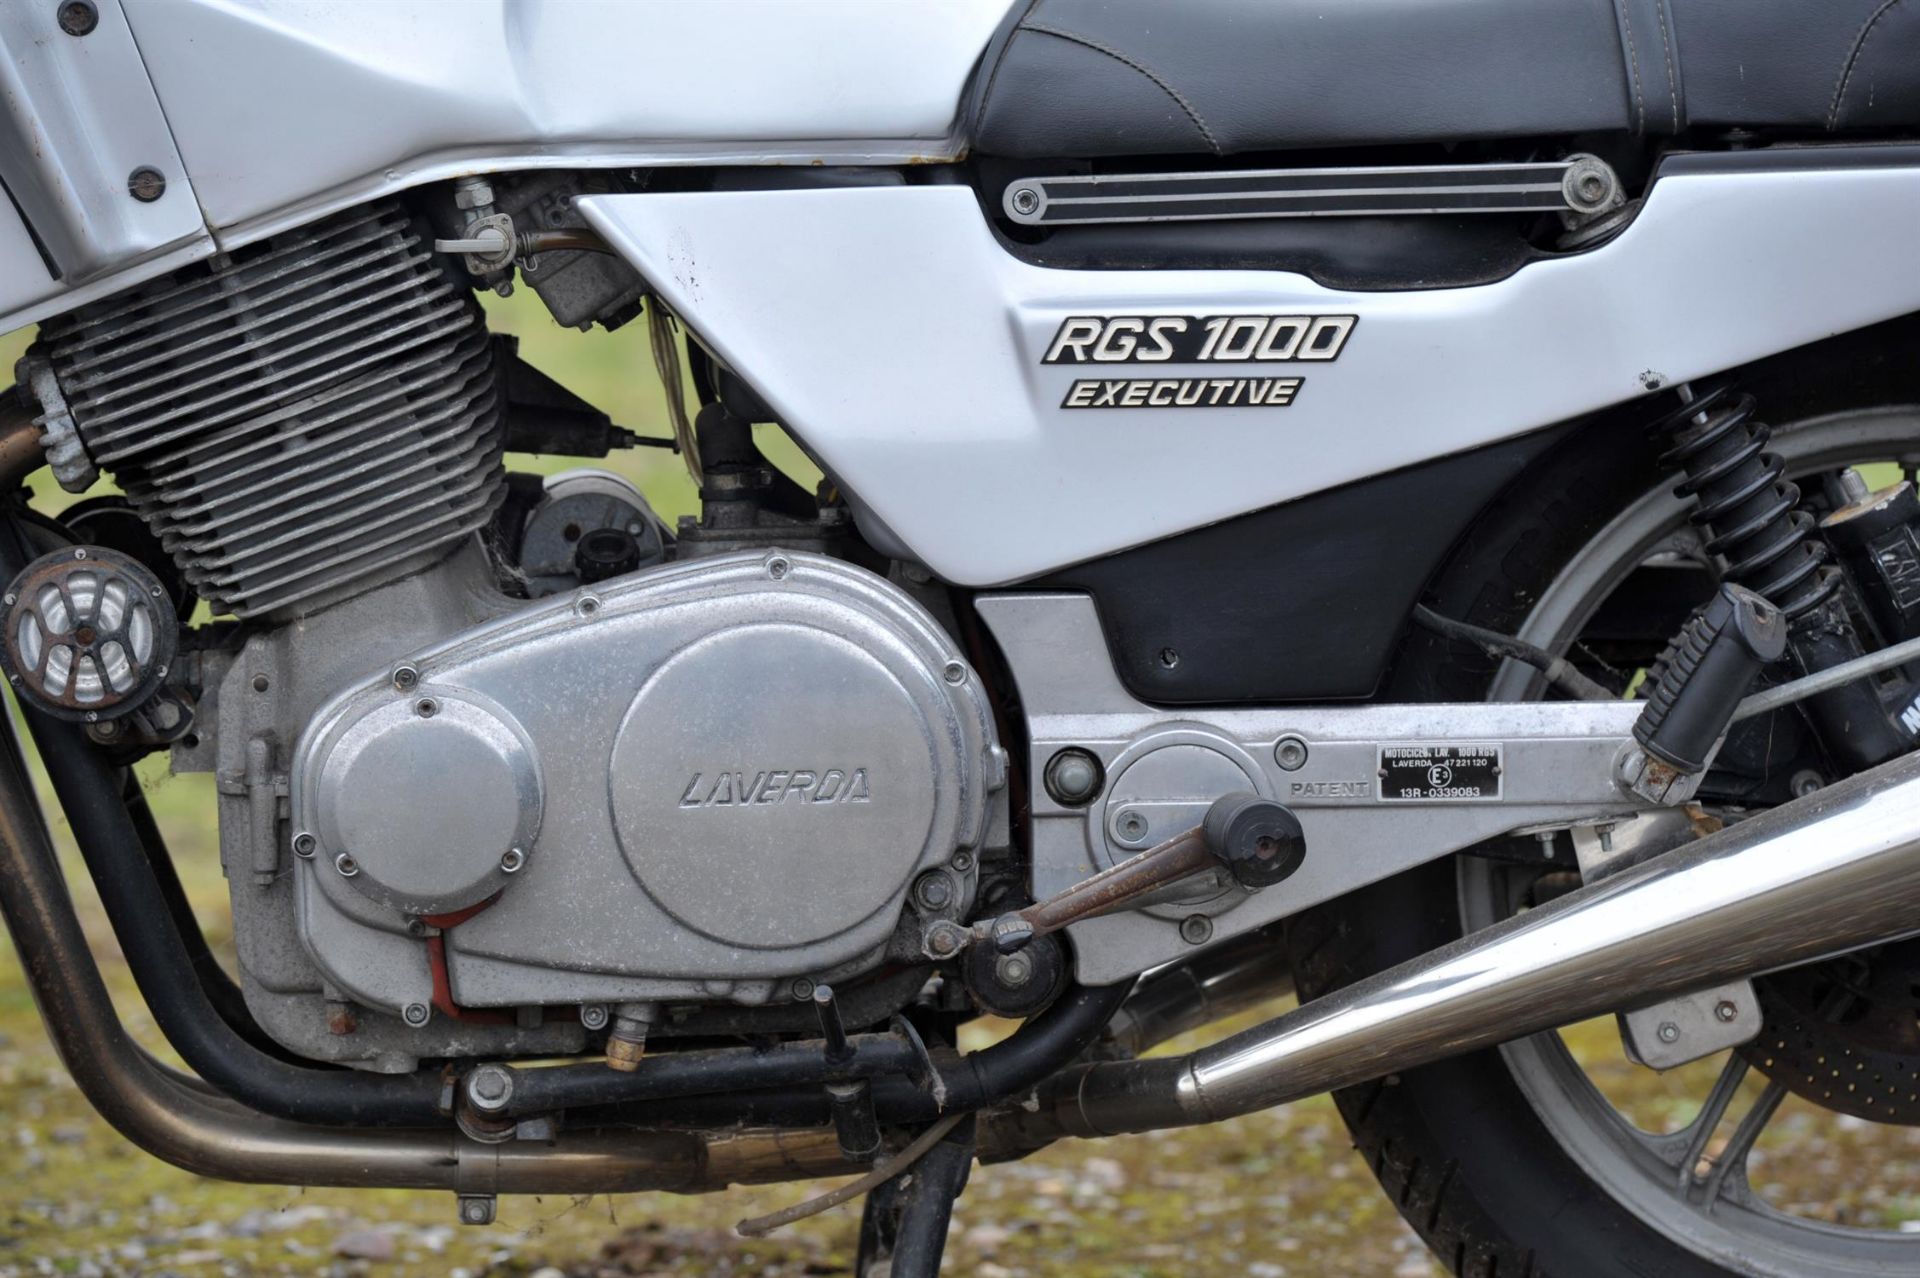 Motor Bike, Laverda RGS 1000 Executive, silver chassis, registration number D718 HPR, 1.8cc. - Image 3 of 12